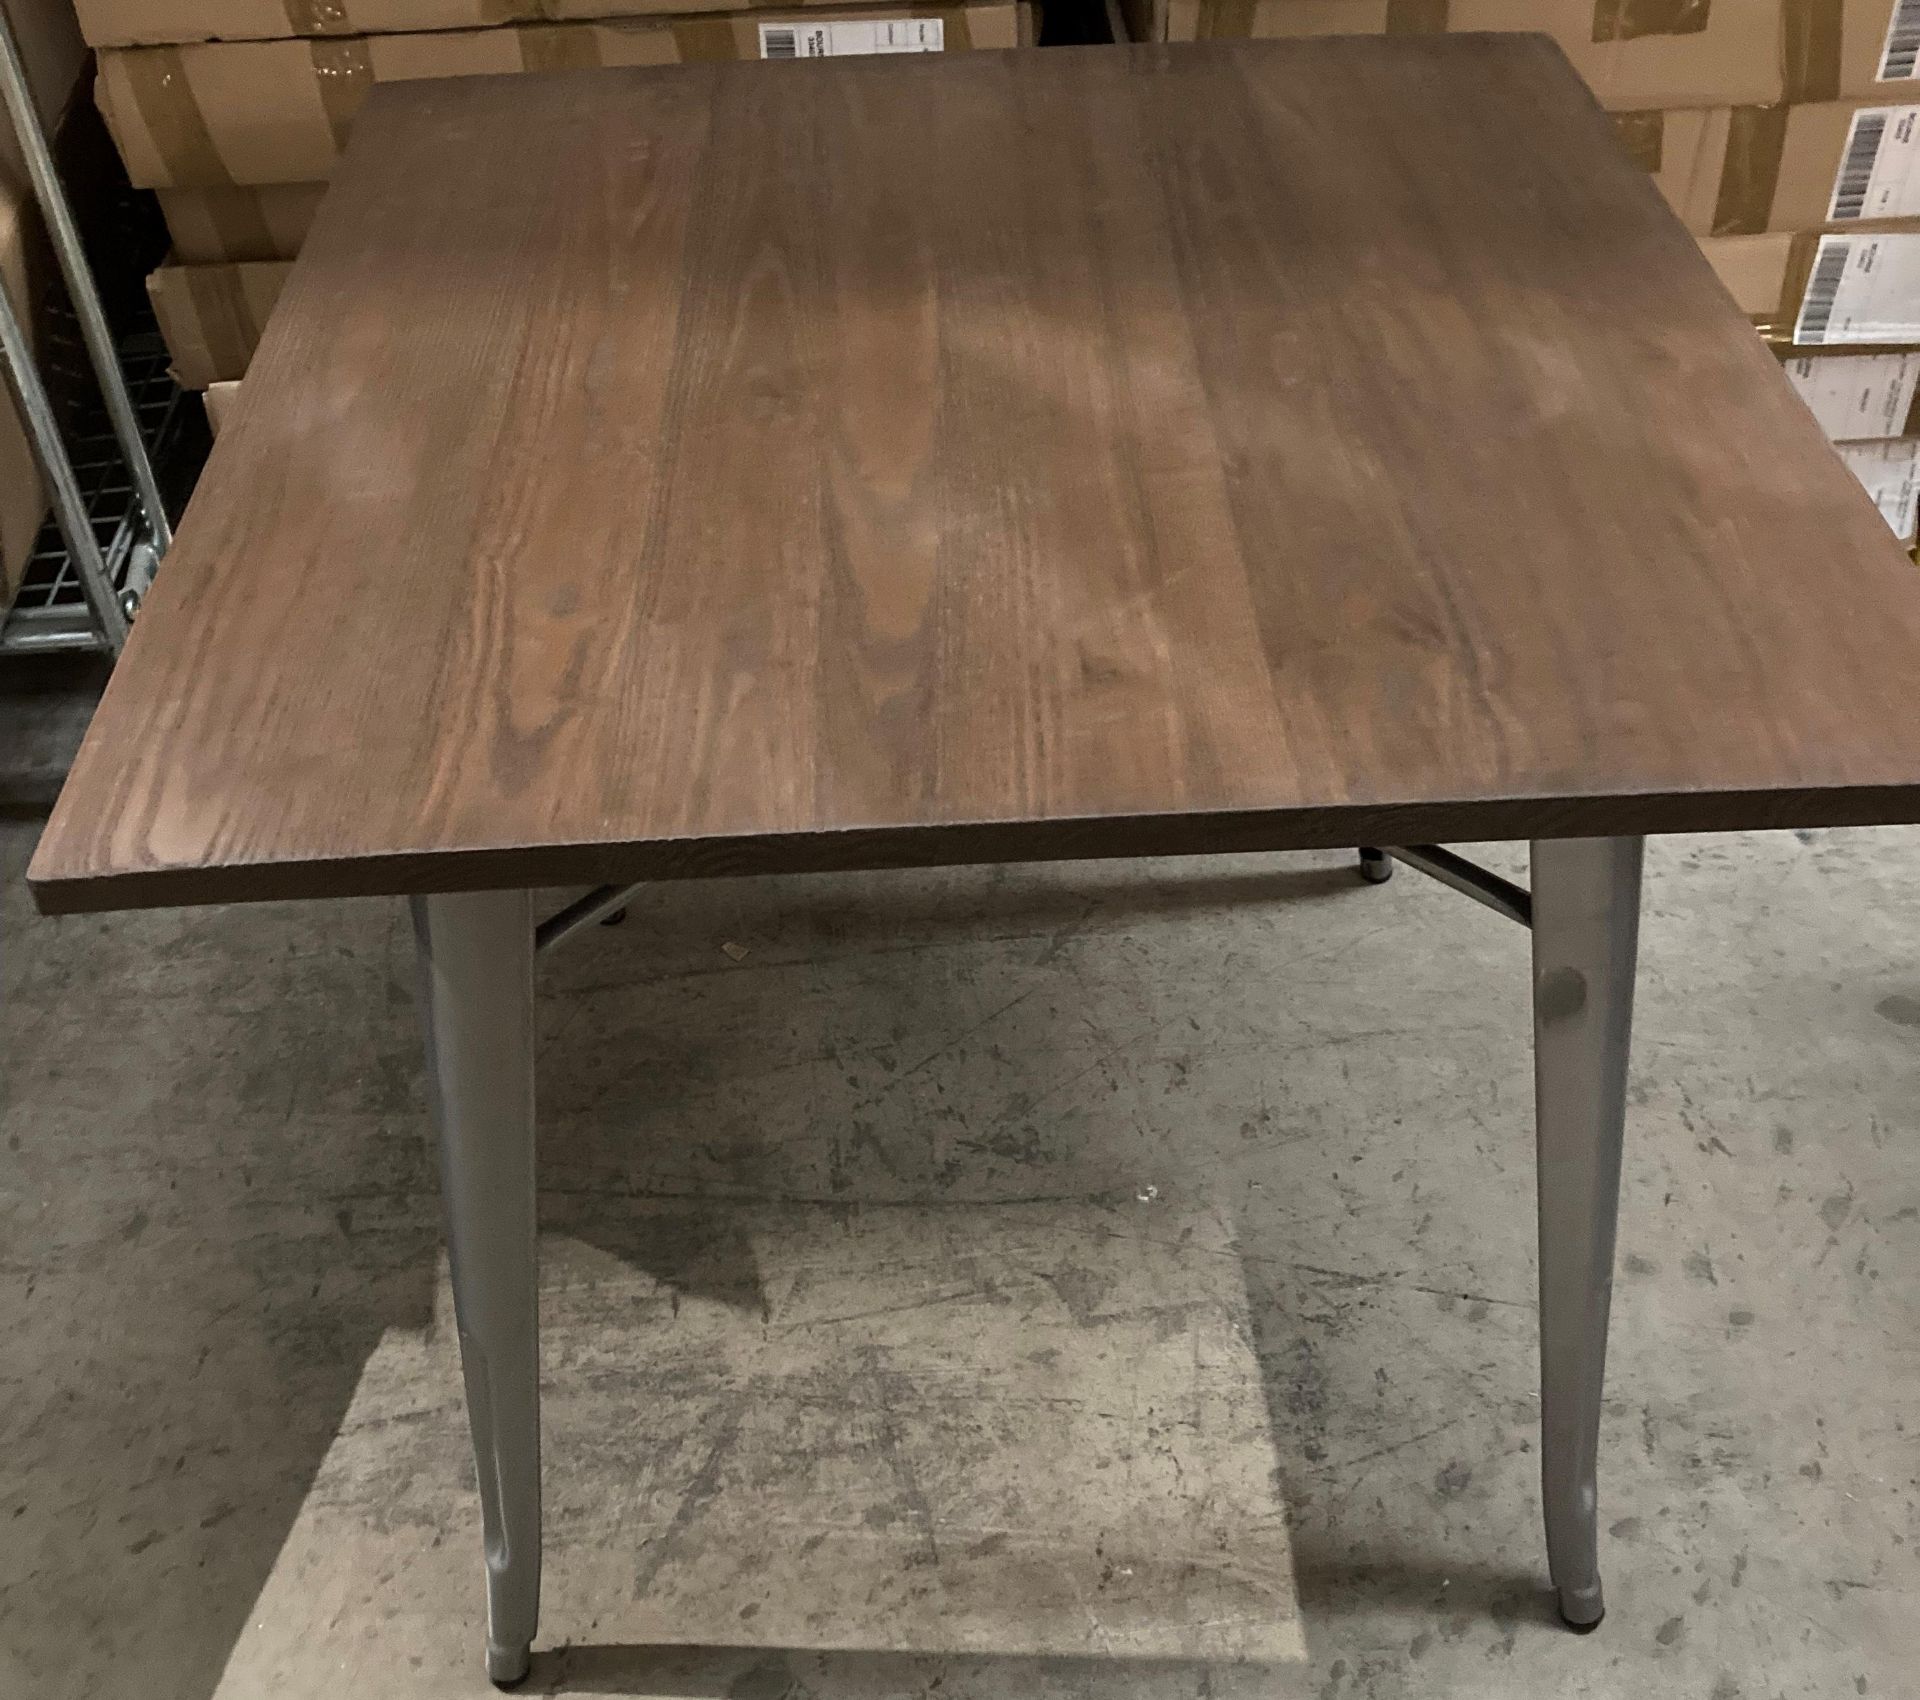 A Tolix Dining Table with Wooden Top and Metal Frame - 80cm x 80cm - Boxed - Image 2 of 2